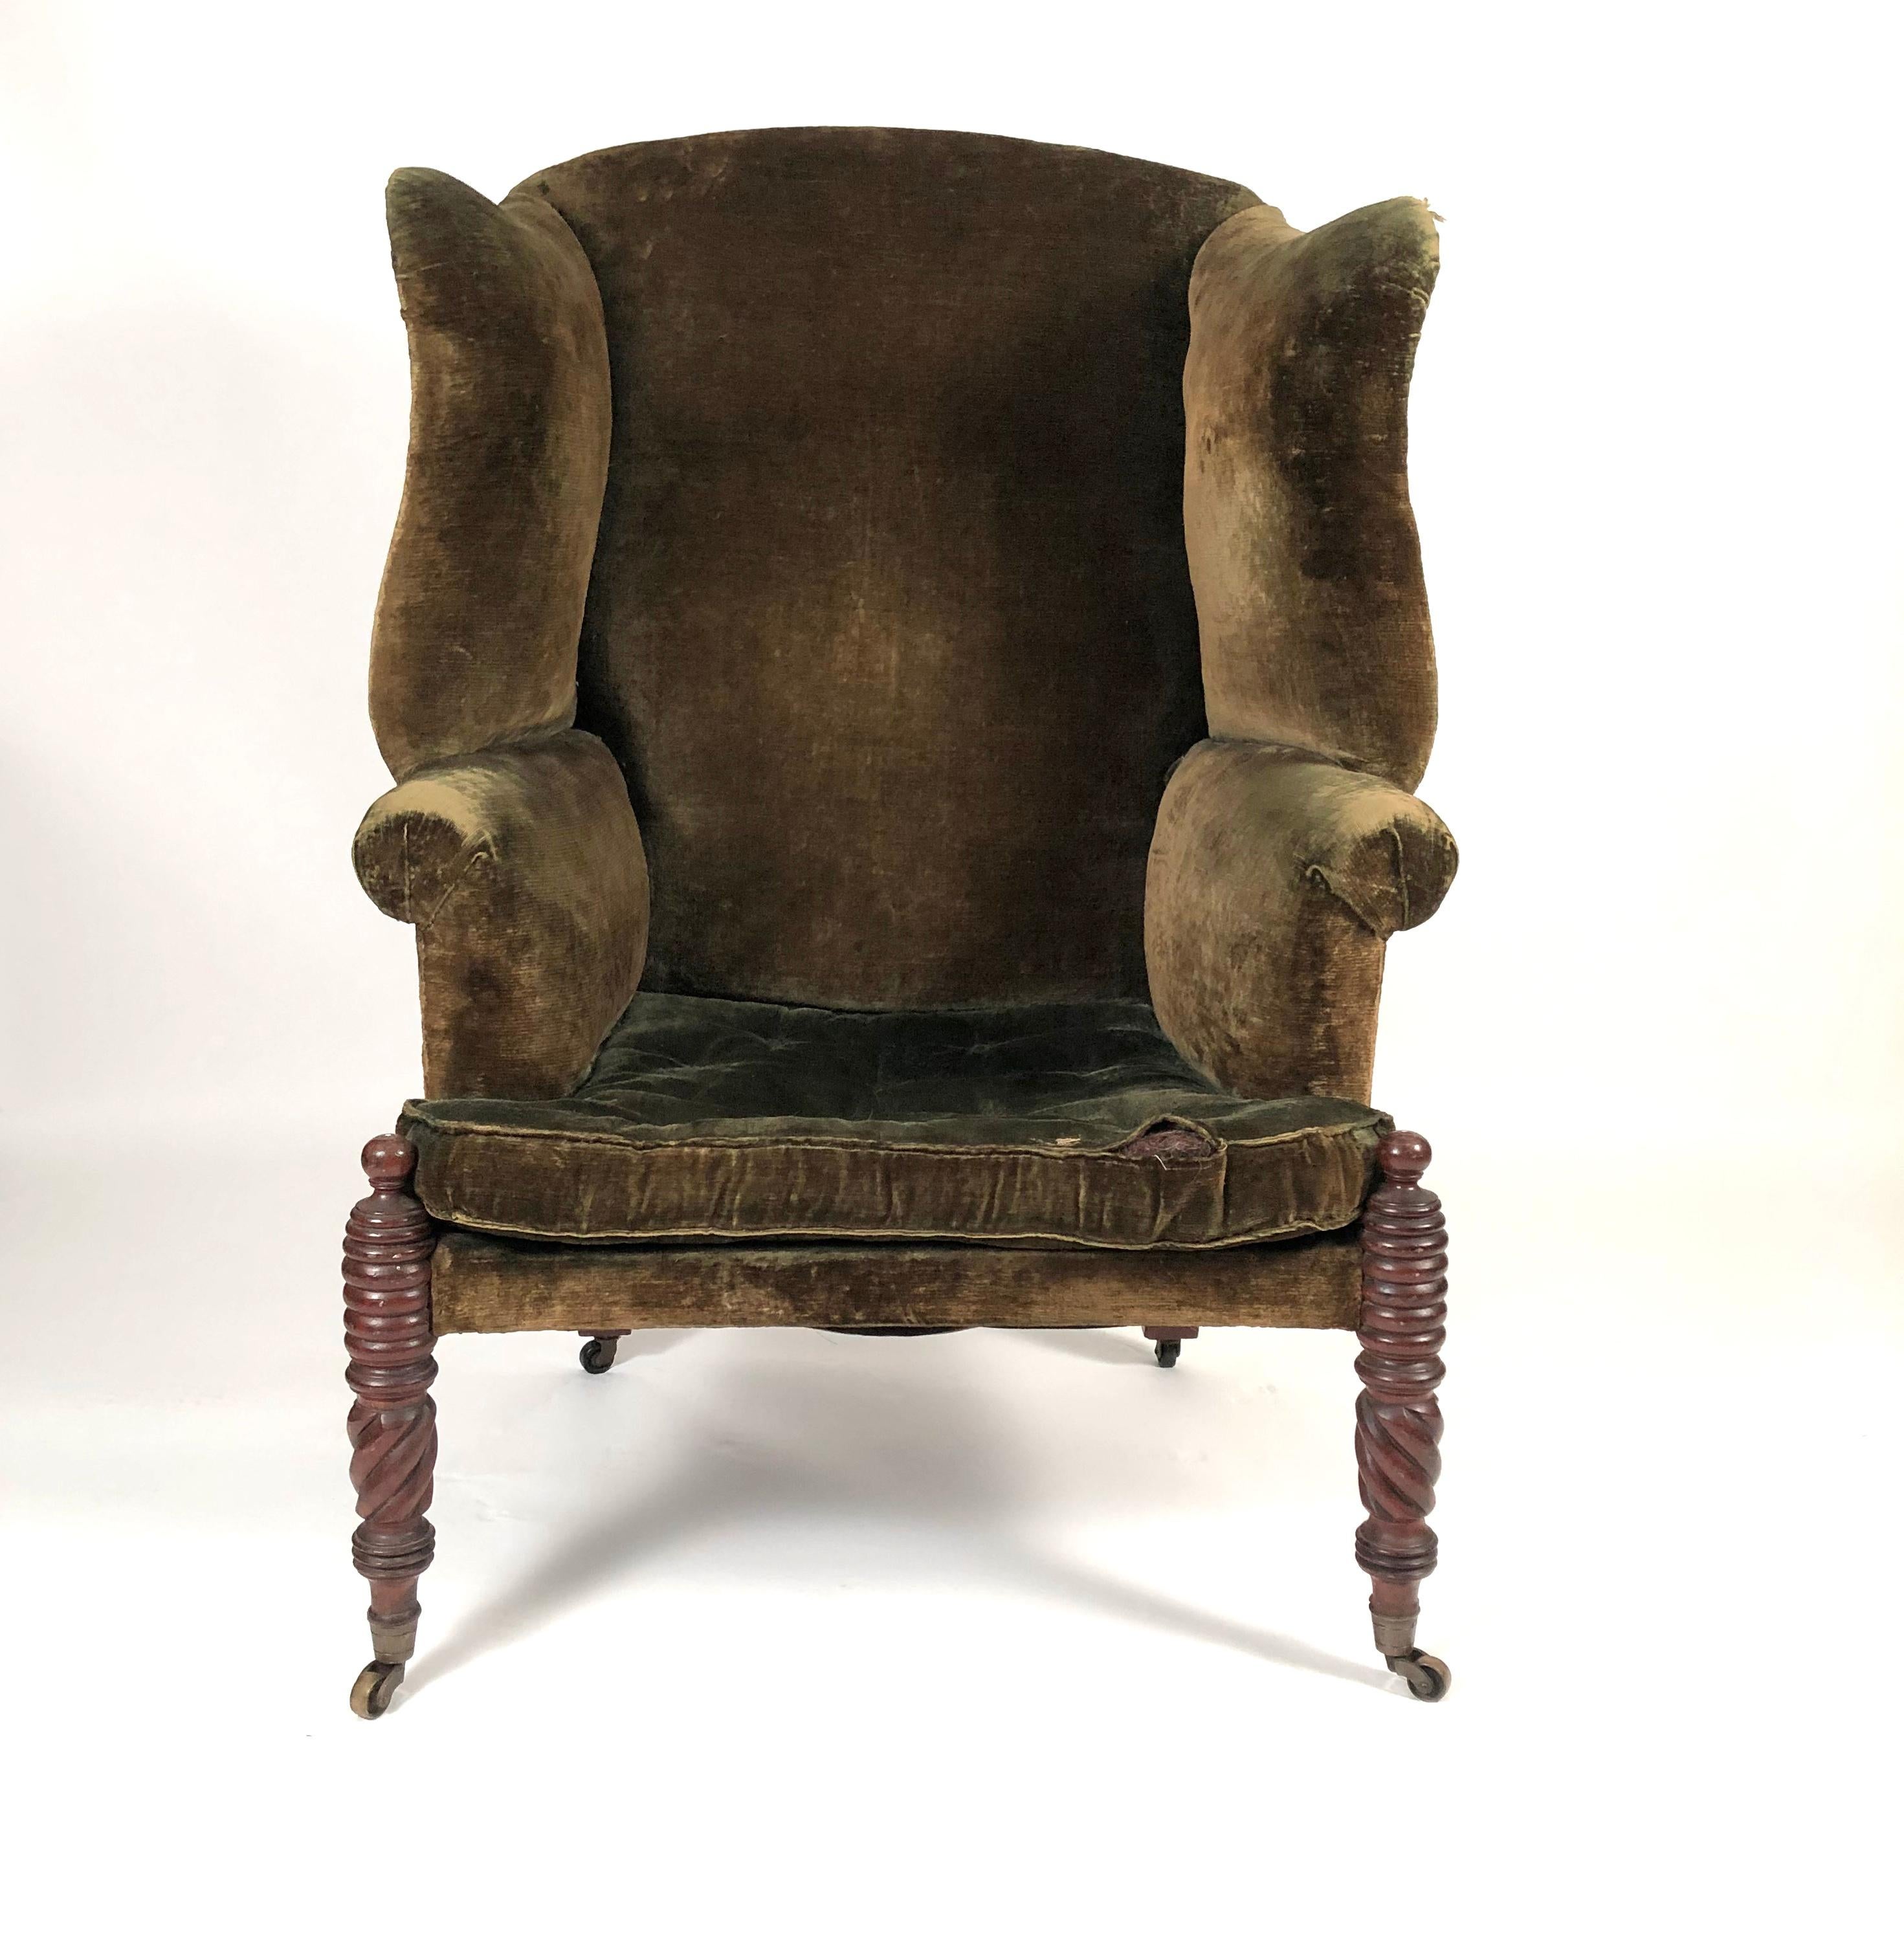 A Federal period wingback chair from Portsmouth, New Hampshire, circa 1810-20, with rope twist carved legs in mahogany, the tops of the two front legs. Each inlaid with a bone dot. This chair has a wonderfully bold form with beautifully carved legs.